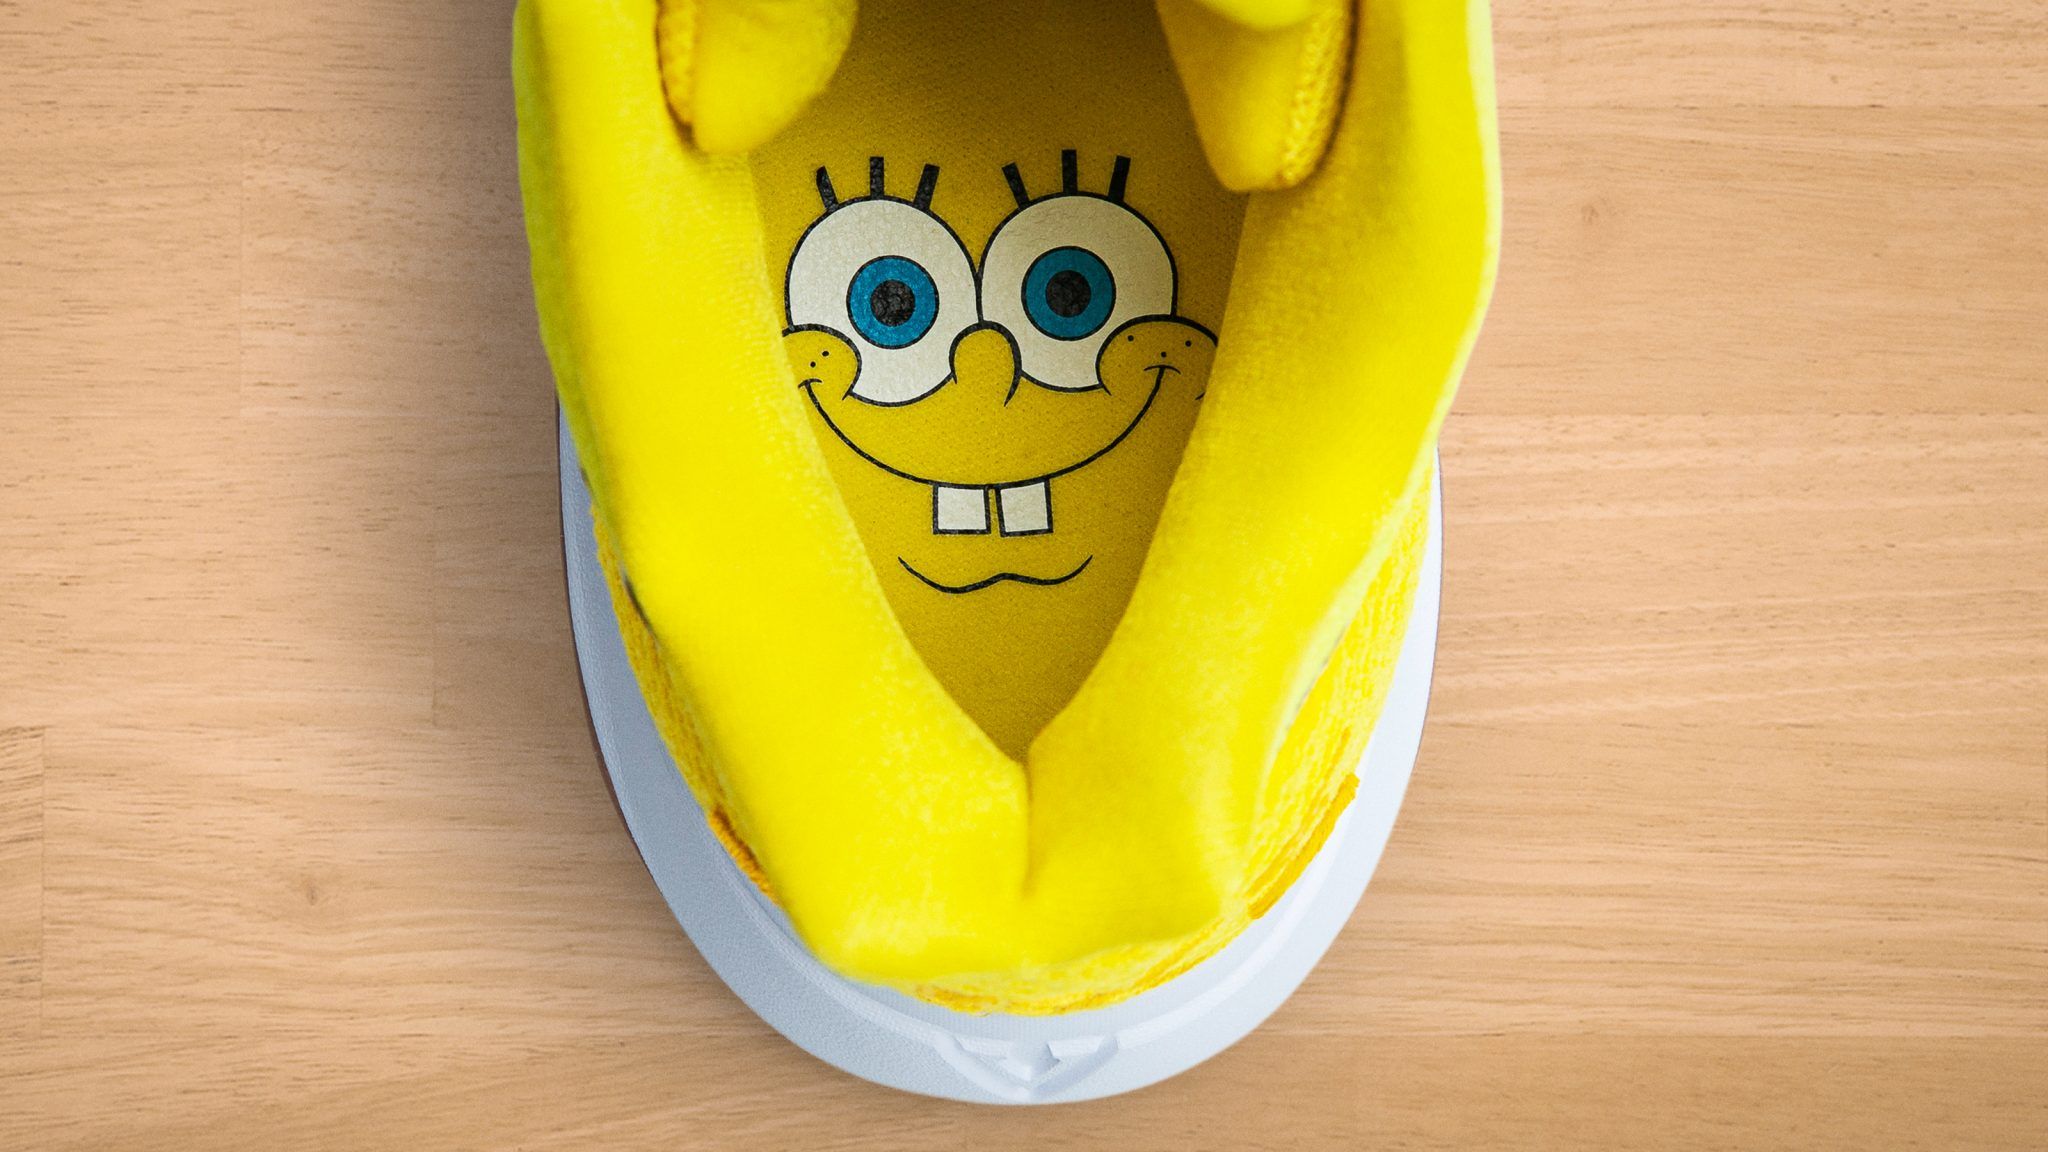 Nike and Viacom Nickelodeon Consumer Products Launch the Kyrie X Spongebob Squarepants Collection